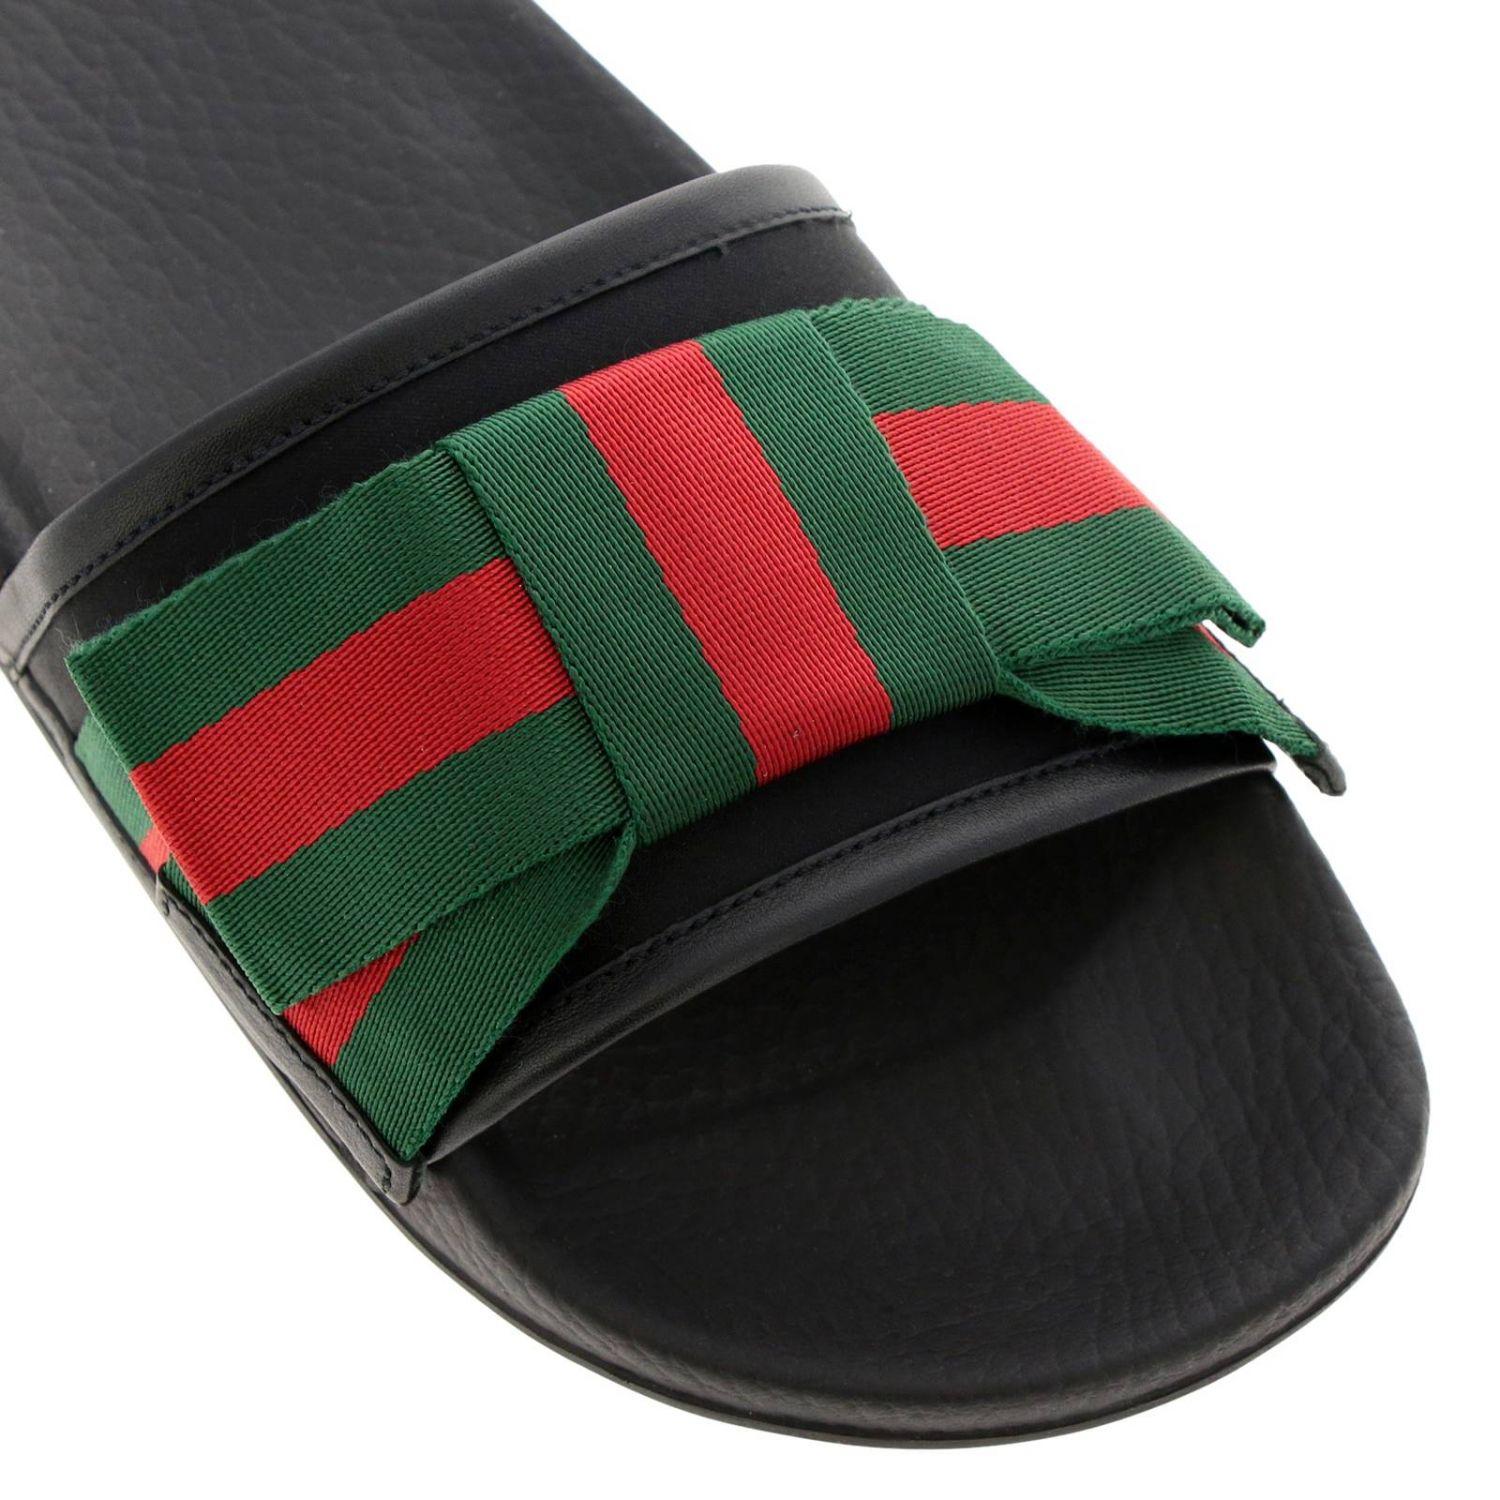 black red and green gucci slides